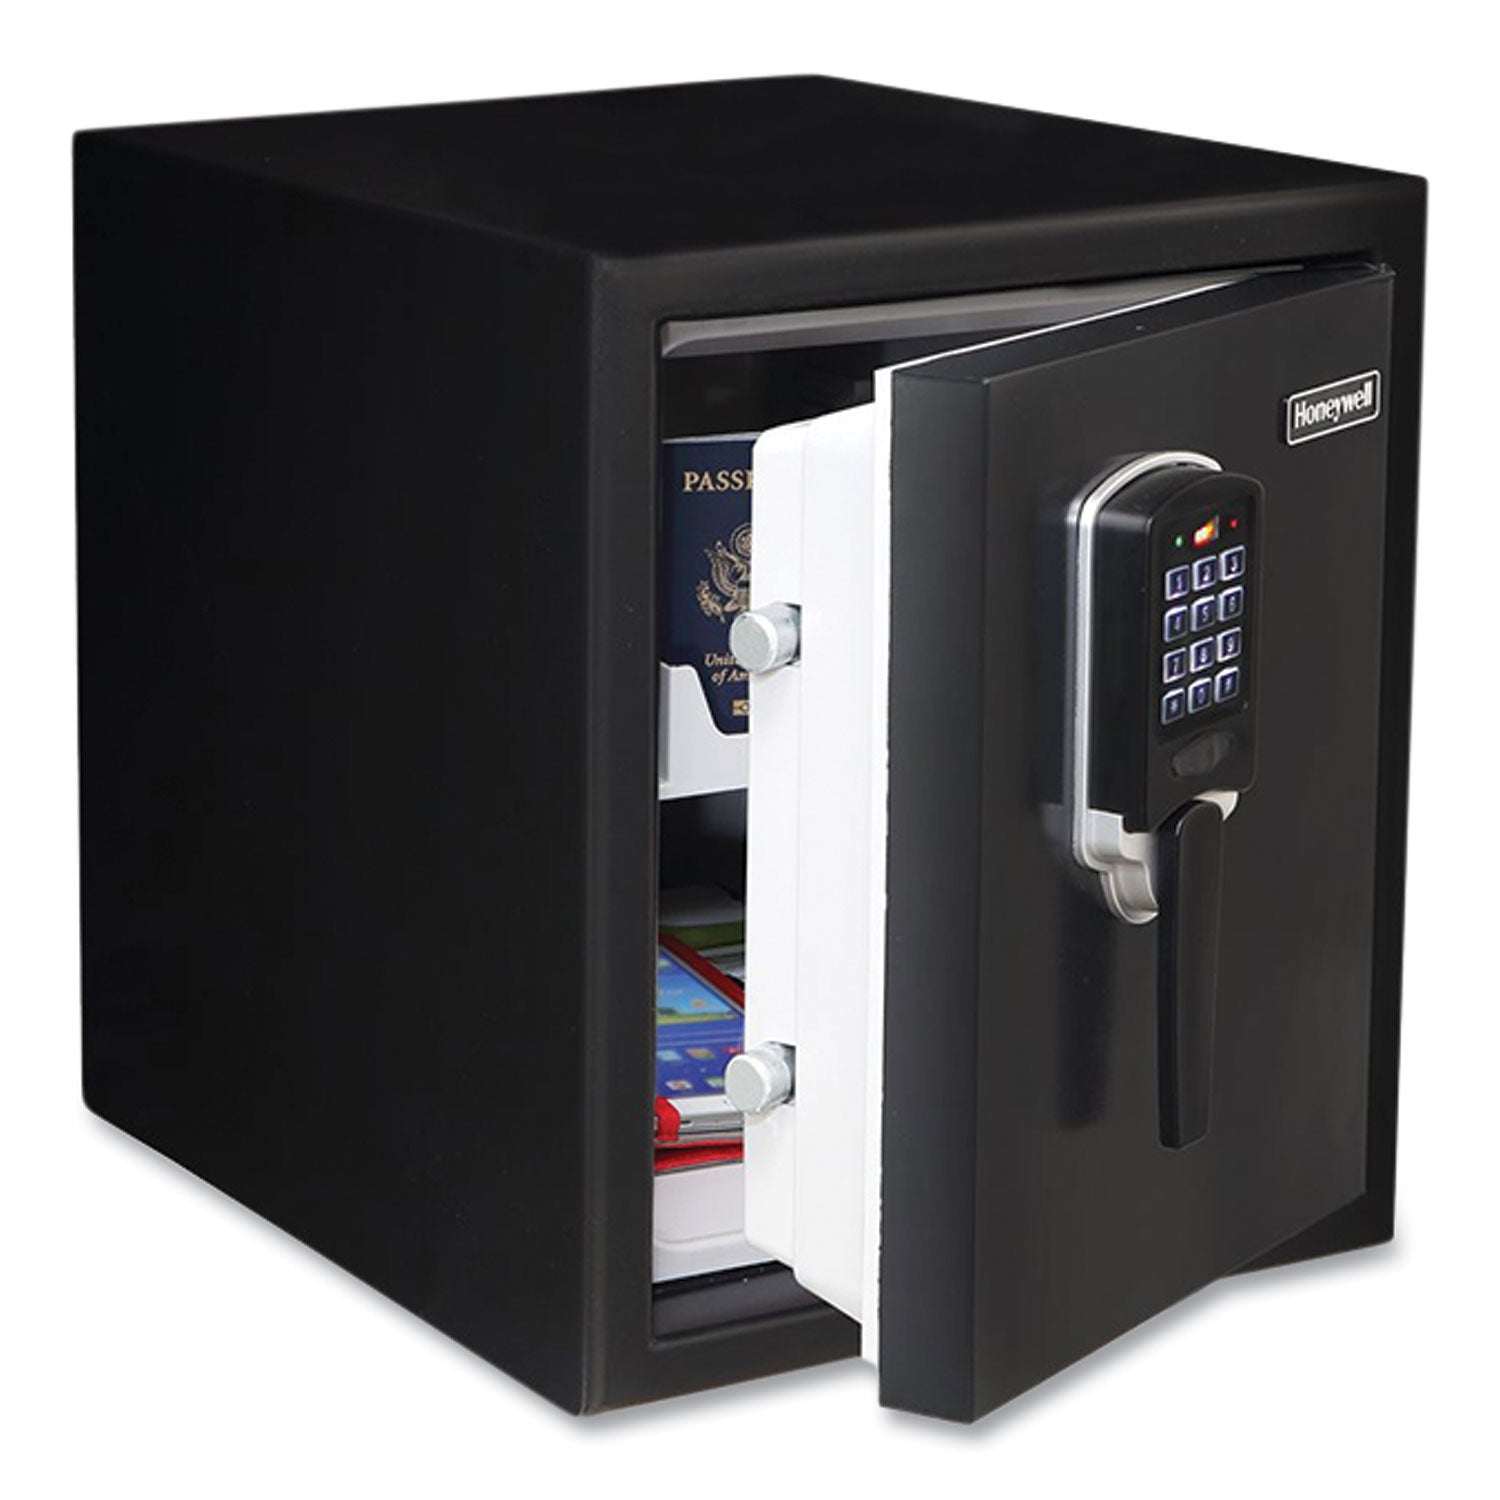 digital-security-steel-fire-and-waterproof-safe-with-keypad-and-key-lock-146-x-202-x-177-09-cu-ft-black_hwl2605 - 4